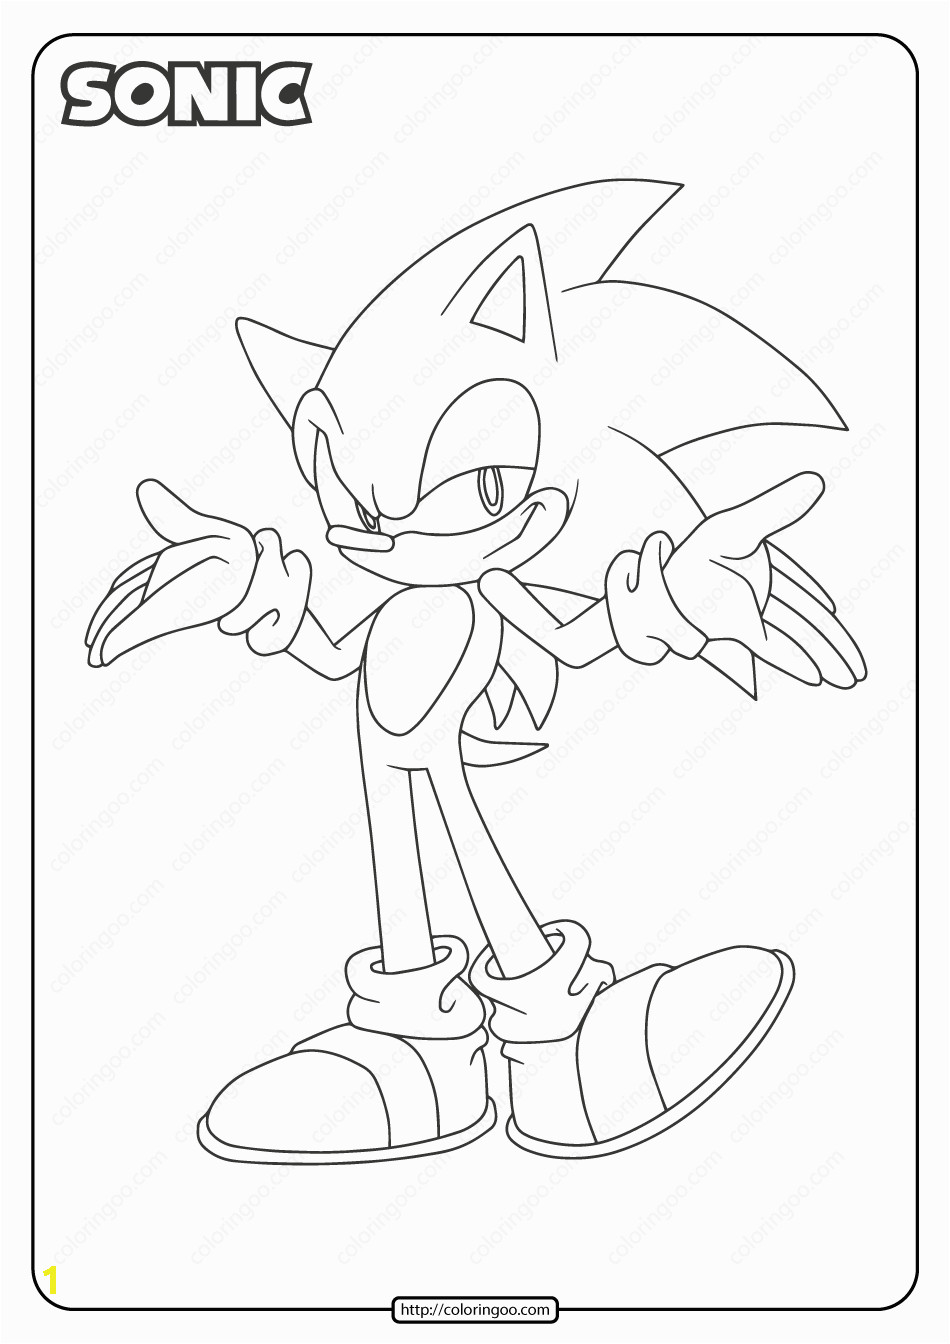 printable pdf sonic the hedgehog coloring pages